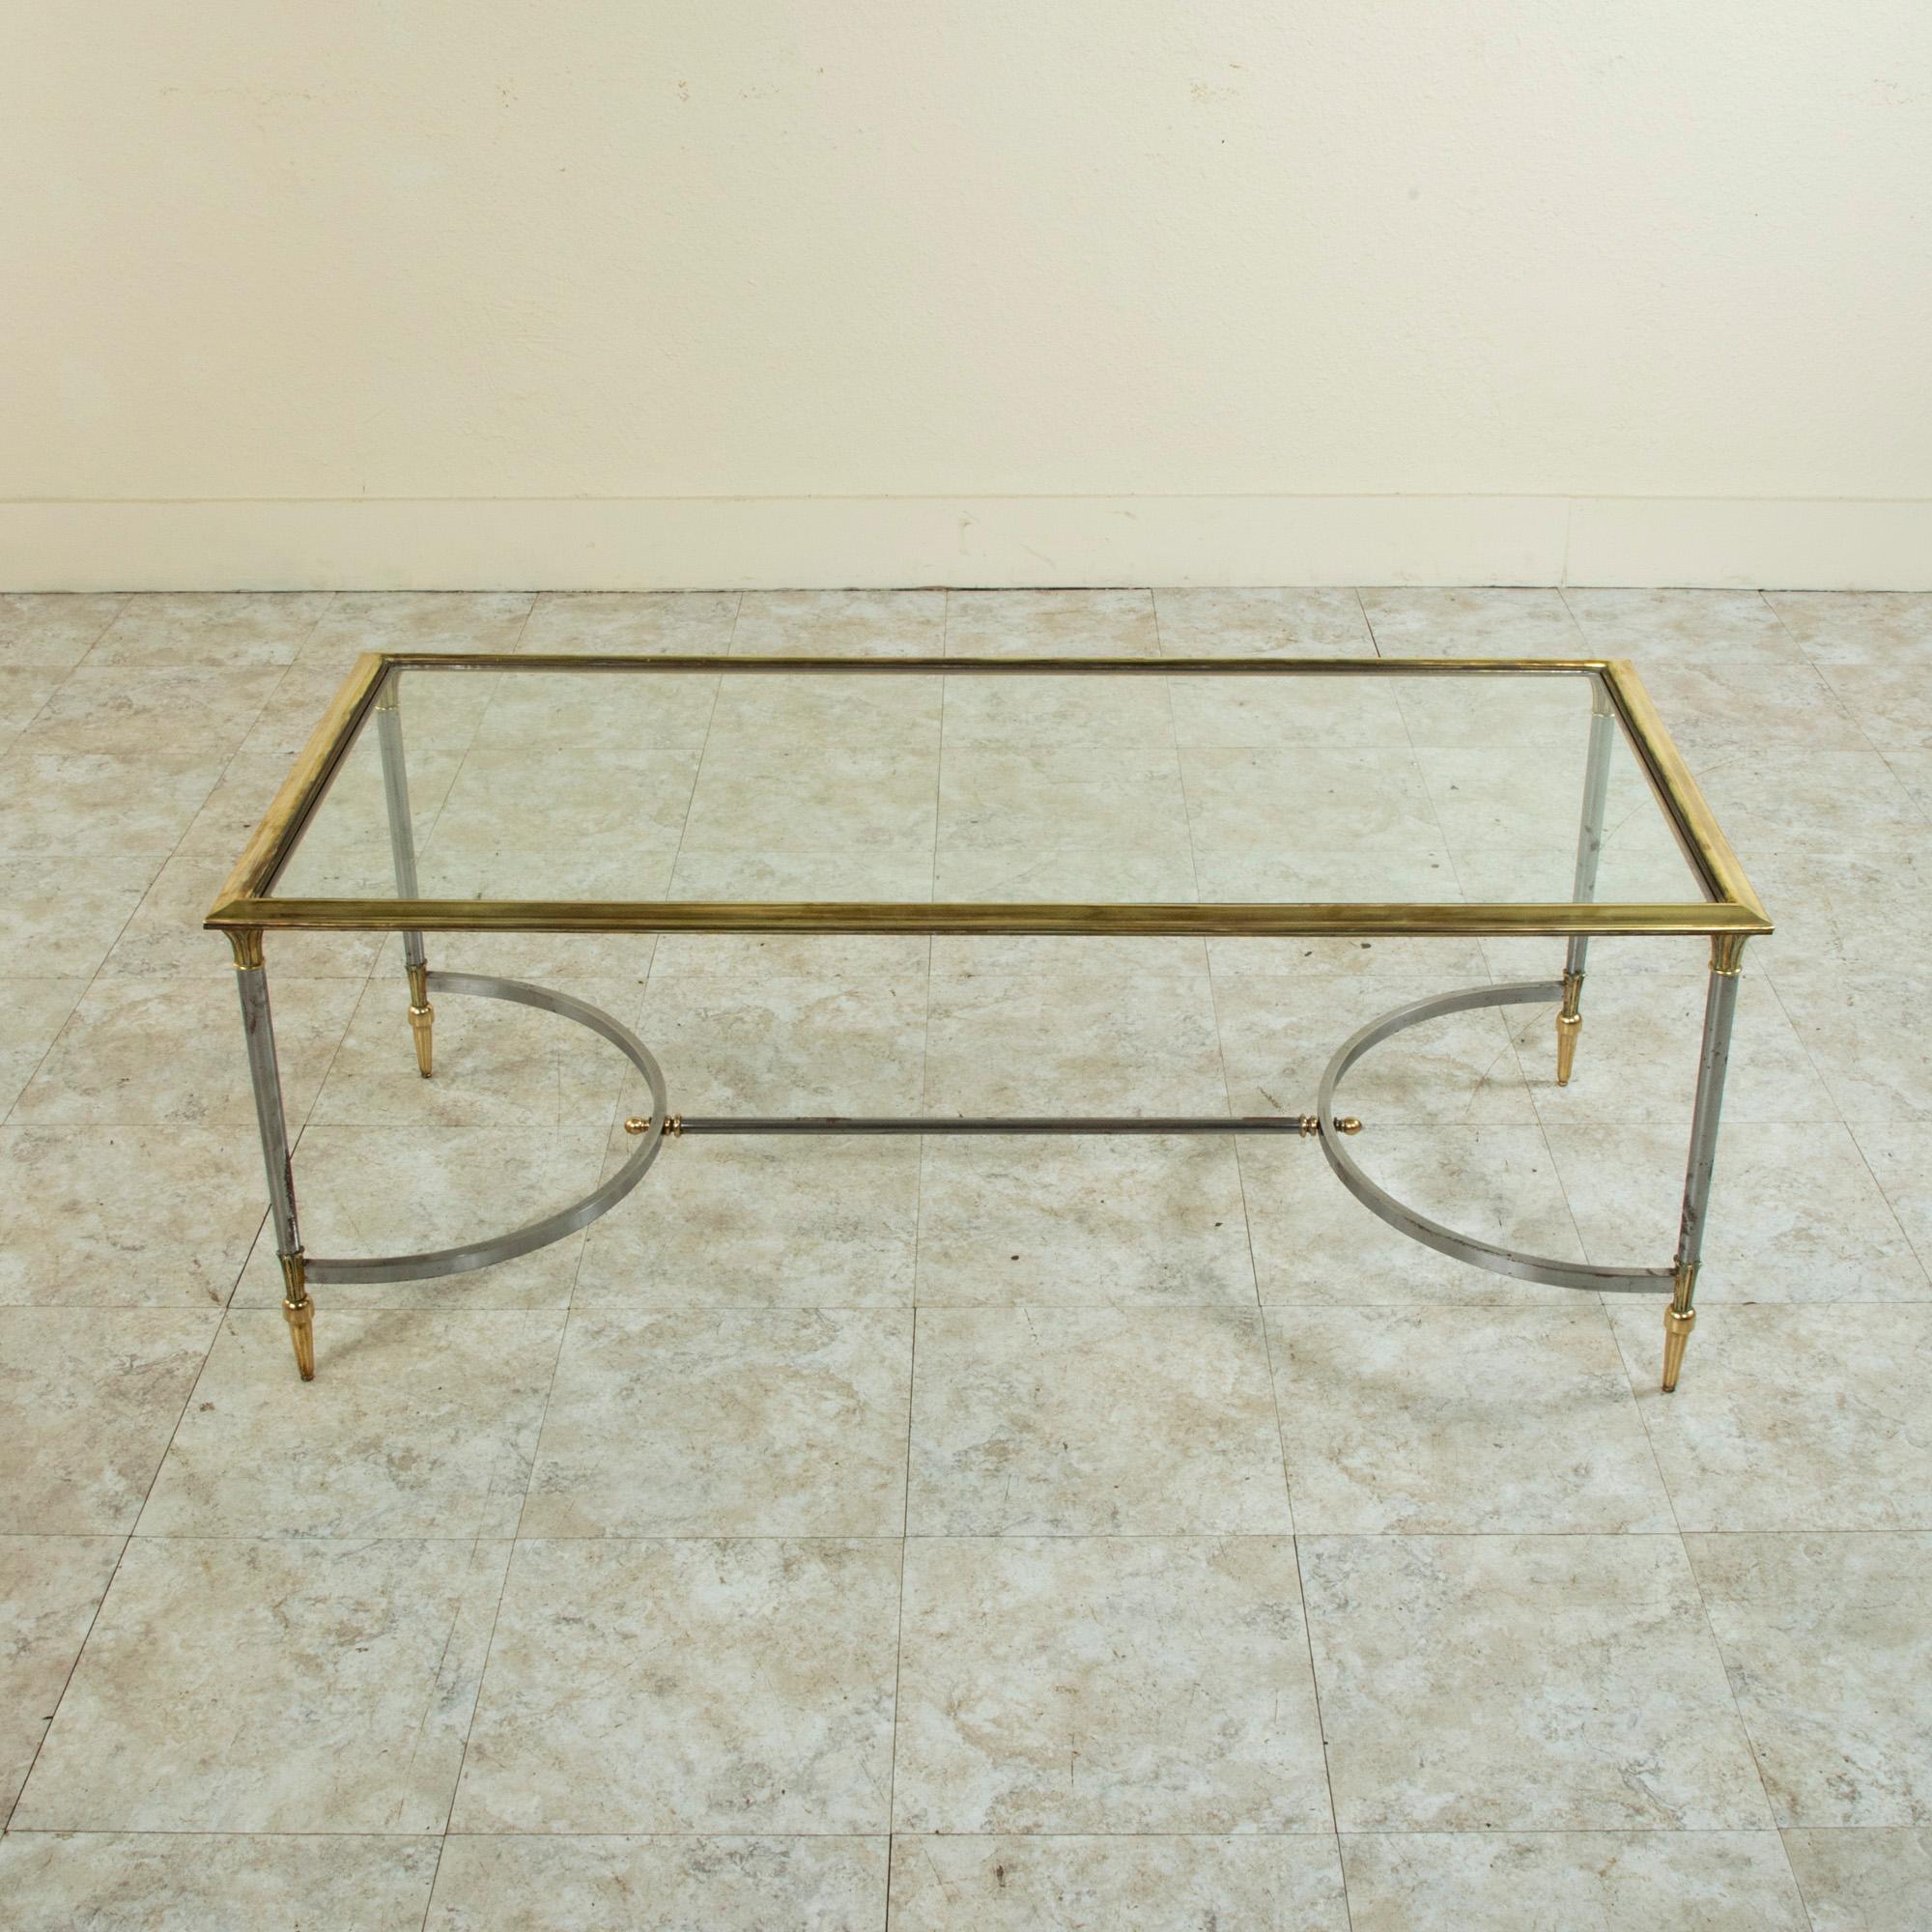 20th Century Mid-Century French Maison Jansen Steel and Brass Coffee Table with Glass Top